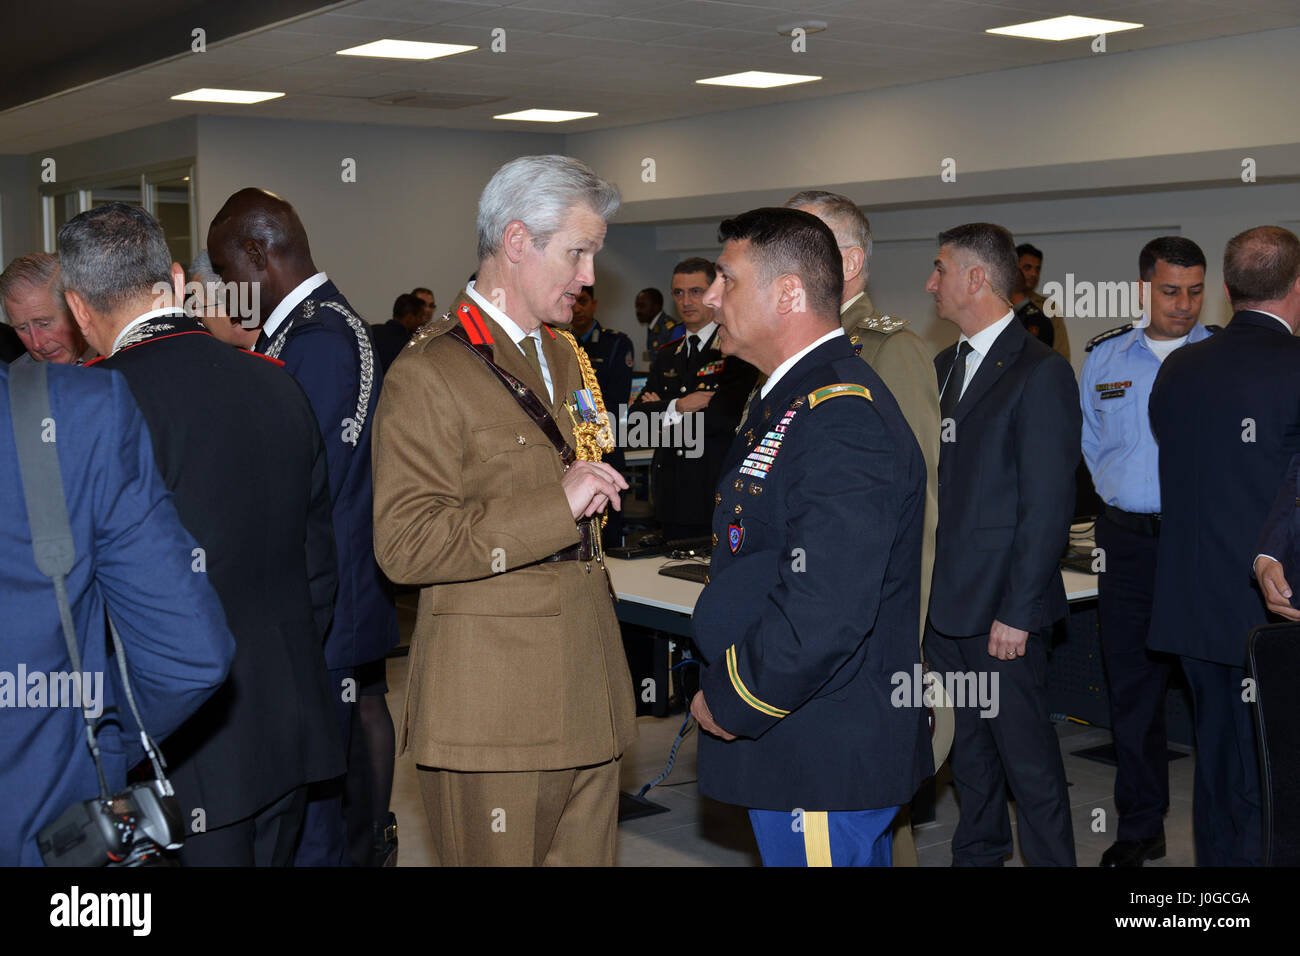 U.S. Army Col. Darius S. Gallegos, CoESPU deputy director (right) speaks with British officer during visit at Center of Excellence for Stability Police Units (CoESPU) Vicenza, Italy, April 1, 2017. (U.S. Army Photo by Visual Information Specialist Antonio Bedin/released) Stock Photo